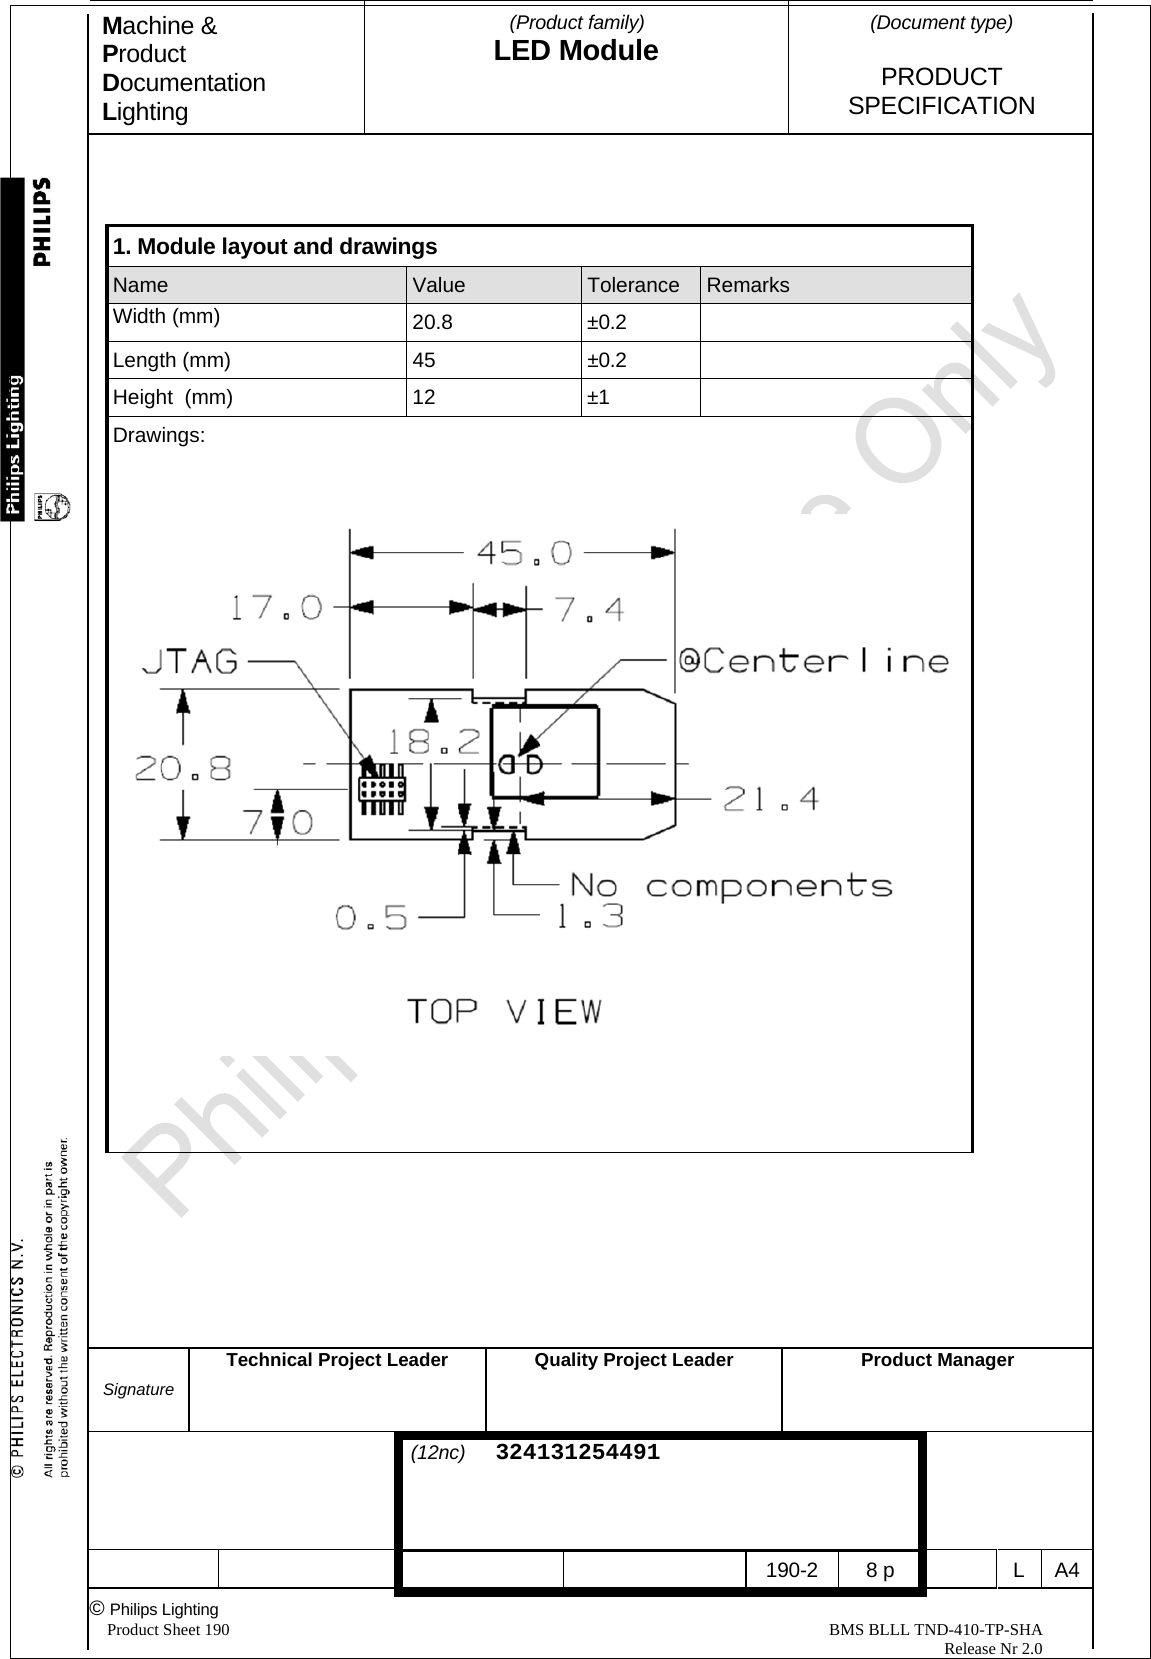 Machine &amp; Product Documentation Lighting  (Product family) LED Module    (Document type)   PRODUCT  SPECIFICATION  Signature Technical Project Leader  Quality Project LeaderProduct Manager                                 (12nc)  324131254491       190-2 8 p  L A4© Philips Lighting   Product Sheet 190                                                                                                                                                BMS BLLL TND-410-TP-SHA                                                                                                                                                                                                          Release Nr 2.0      1. Module layout and drawings Name  Value  Tolerance  Remarks Width (mm)  20.8 ±0.2  Length (mm)  45  ±0.2   Height  (mm)  12  ±1   Drawings:        